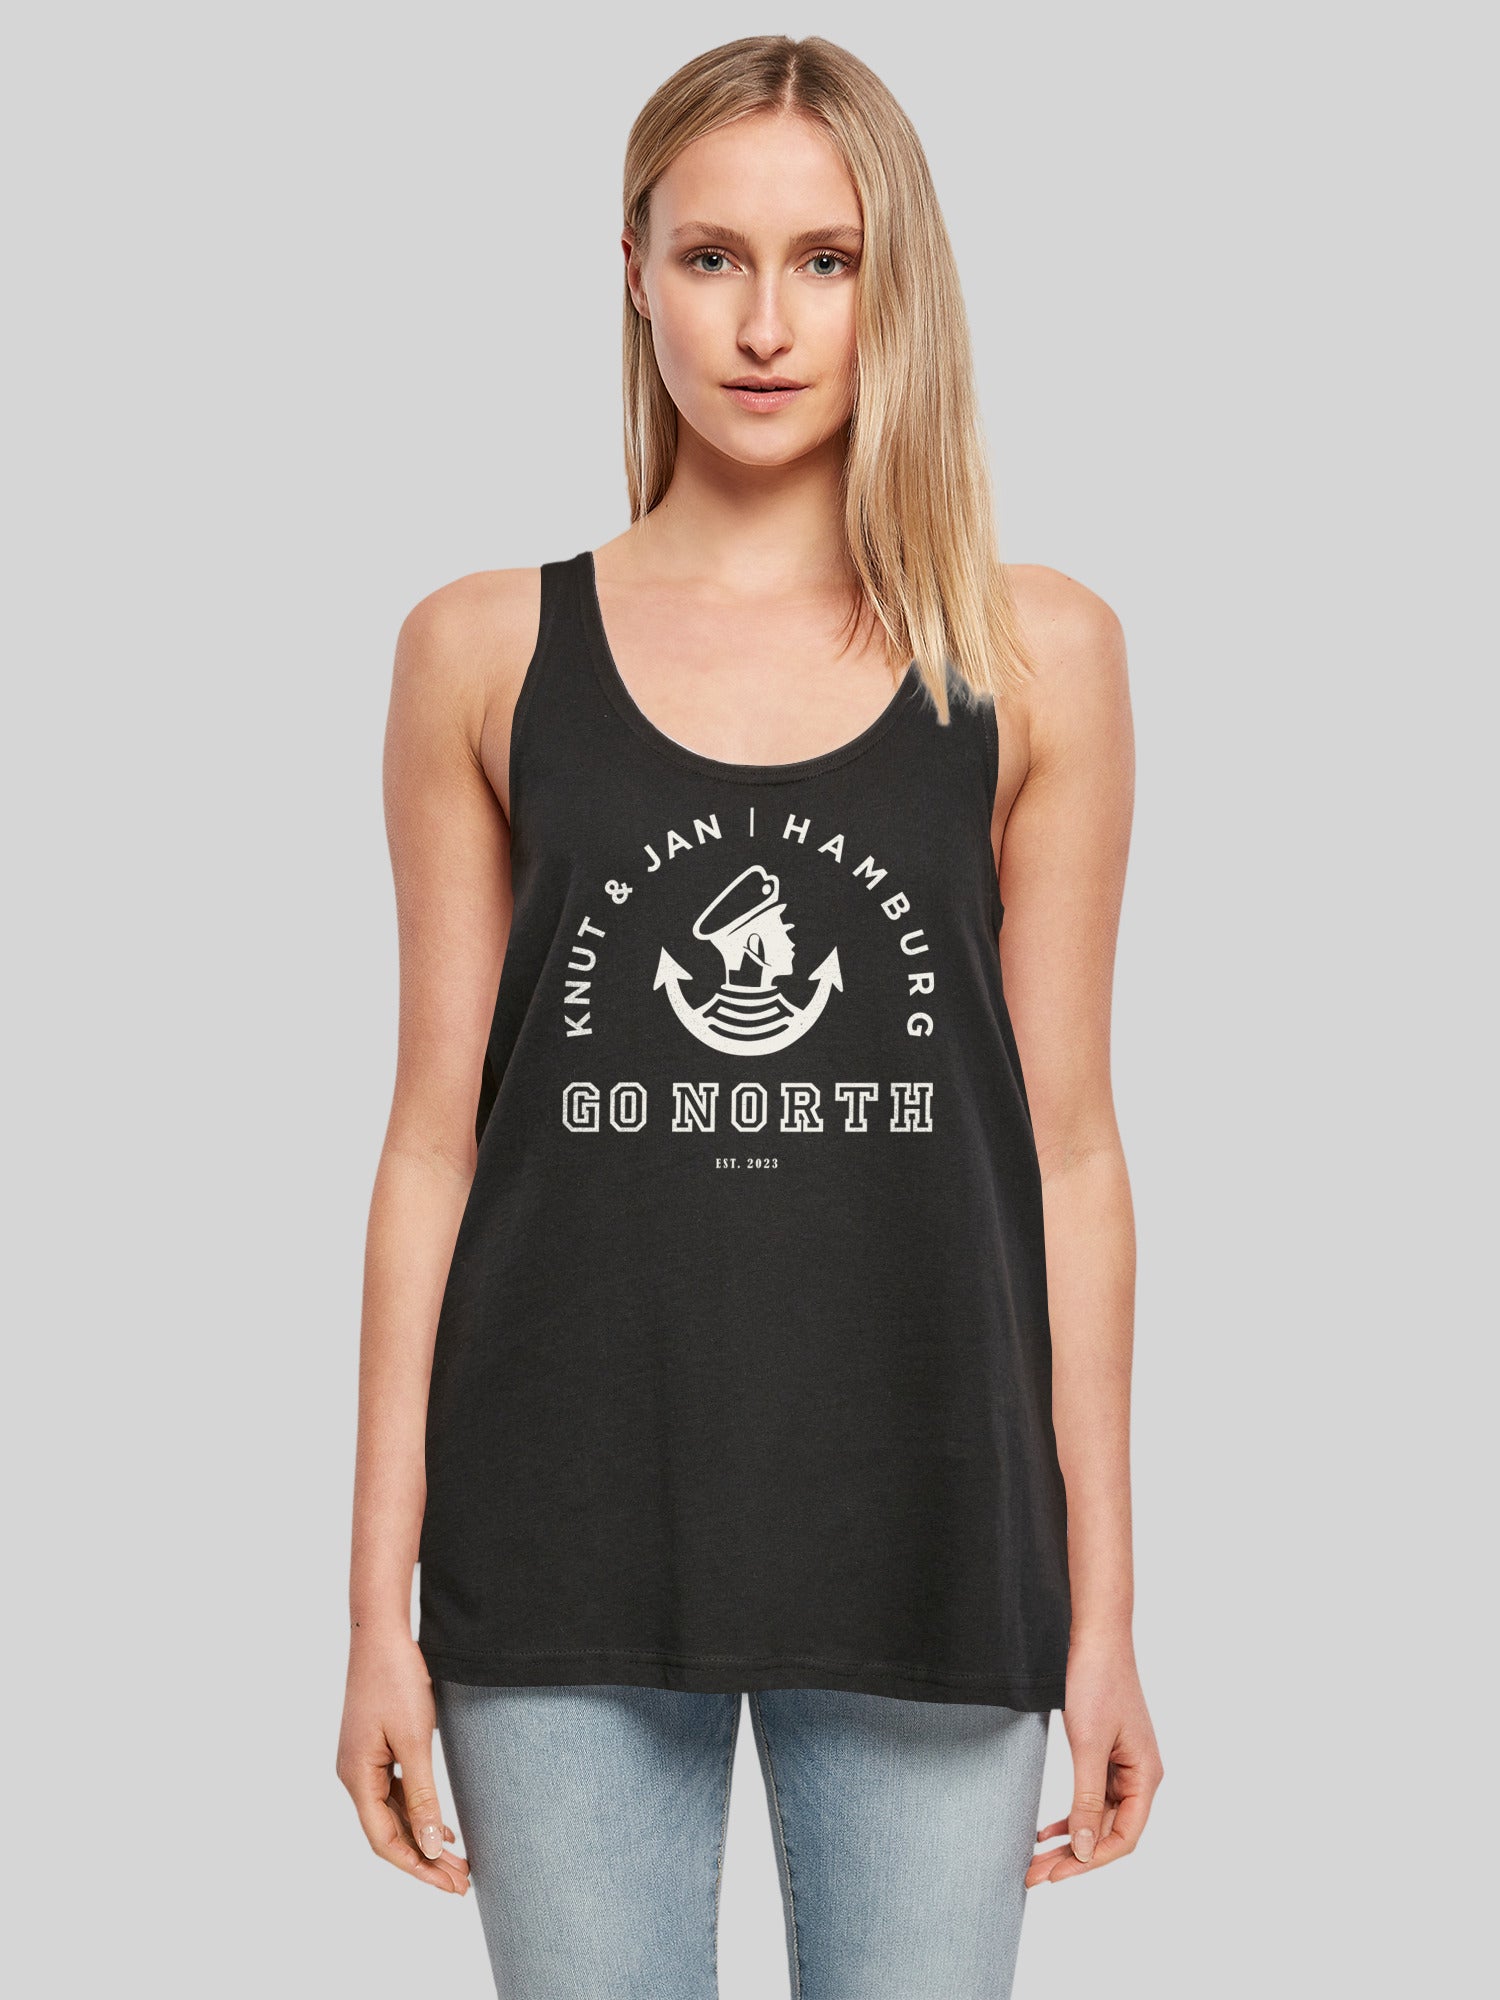 Queen Classic Crest Blk with Ladies Tanktop – F4NT4STIC